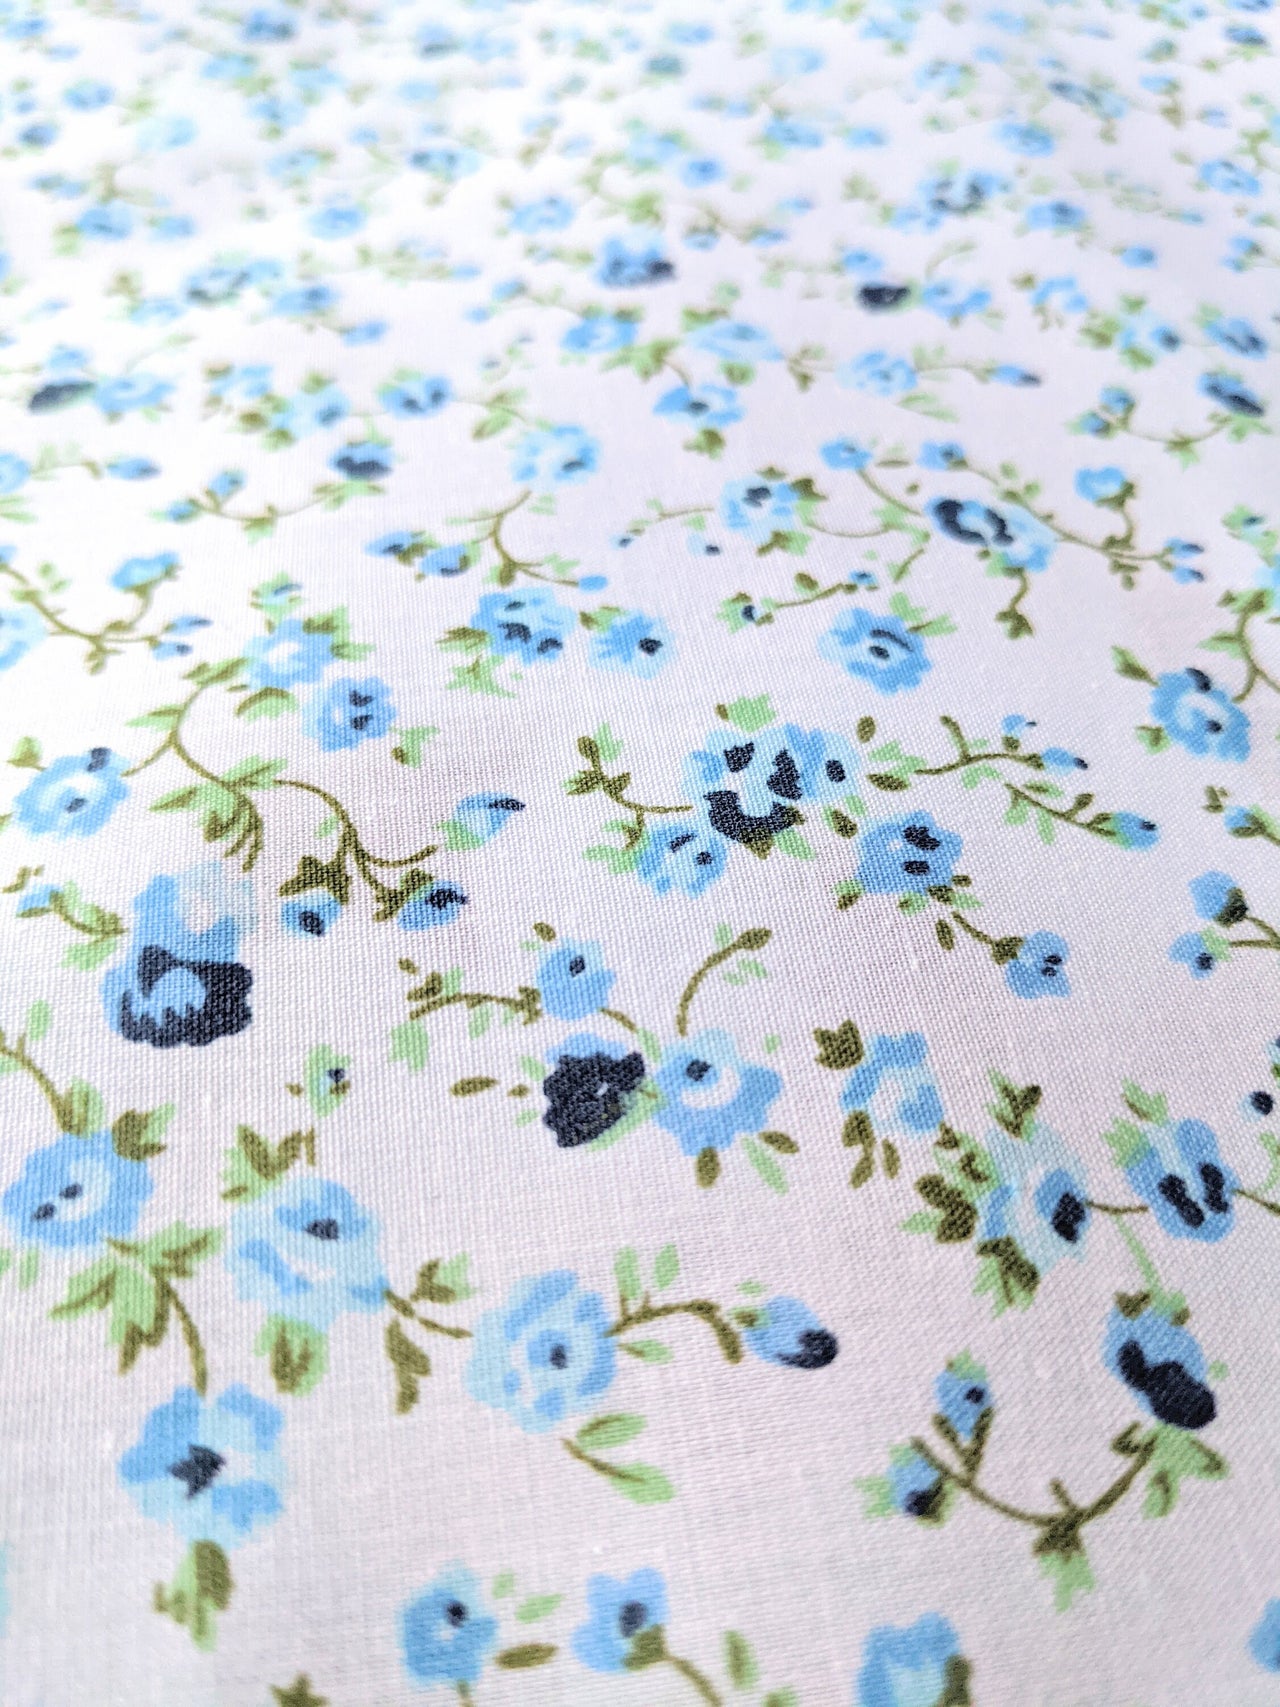 Blue Poly Cotton Rose Fabric, Floral Fabric, Small Print Fabric